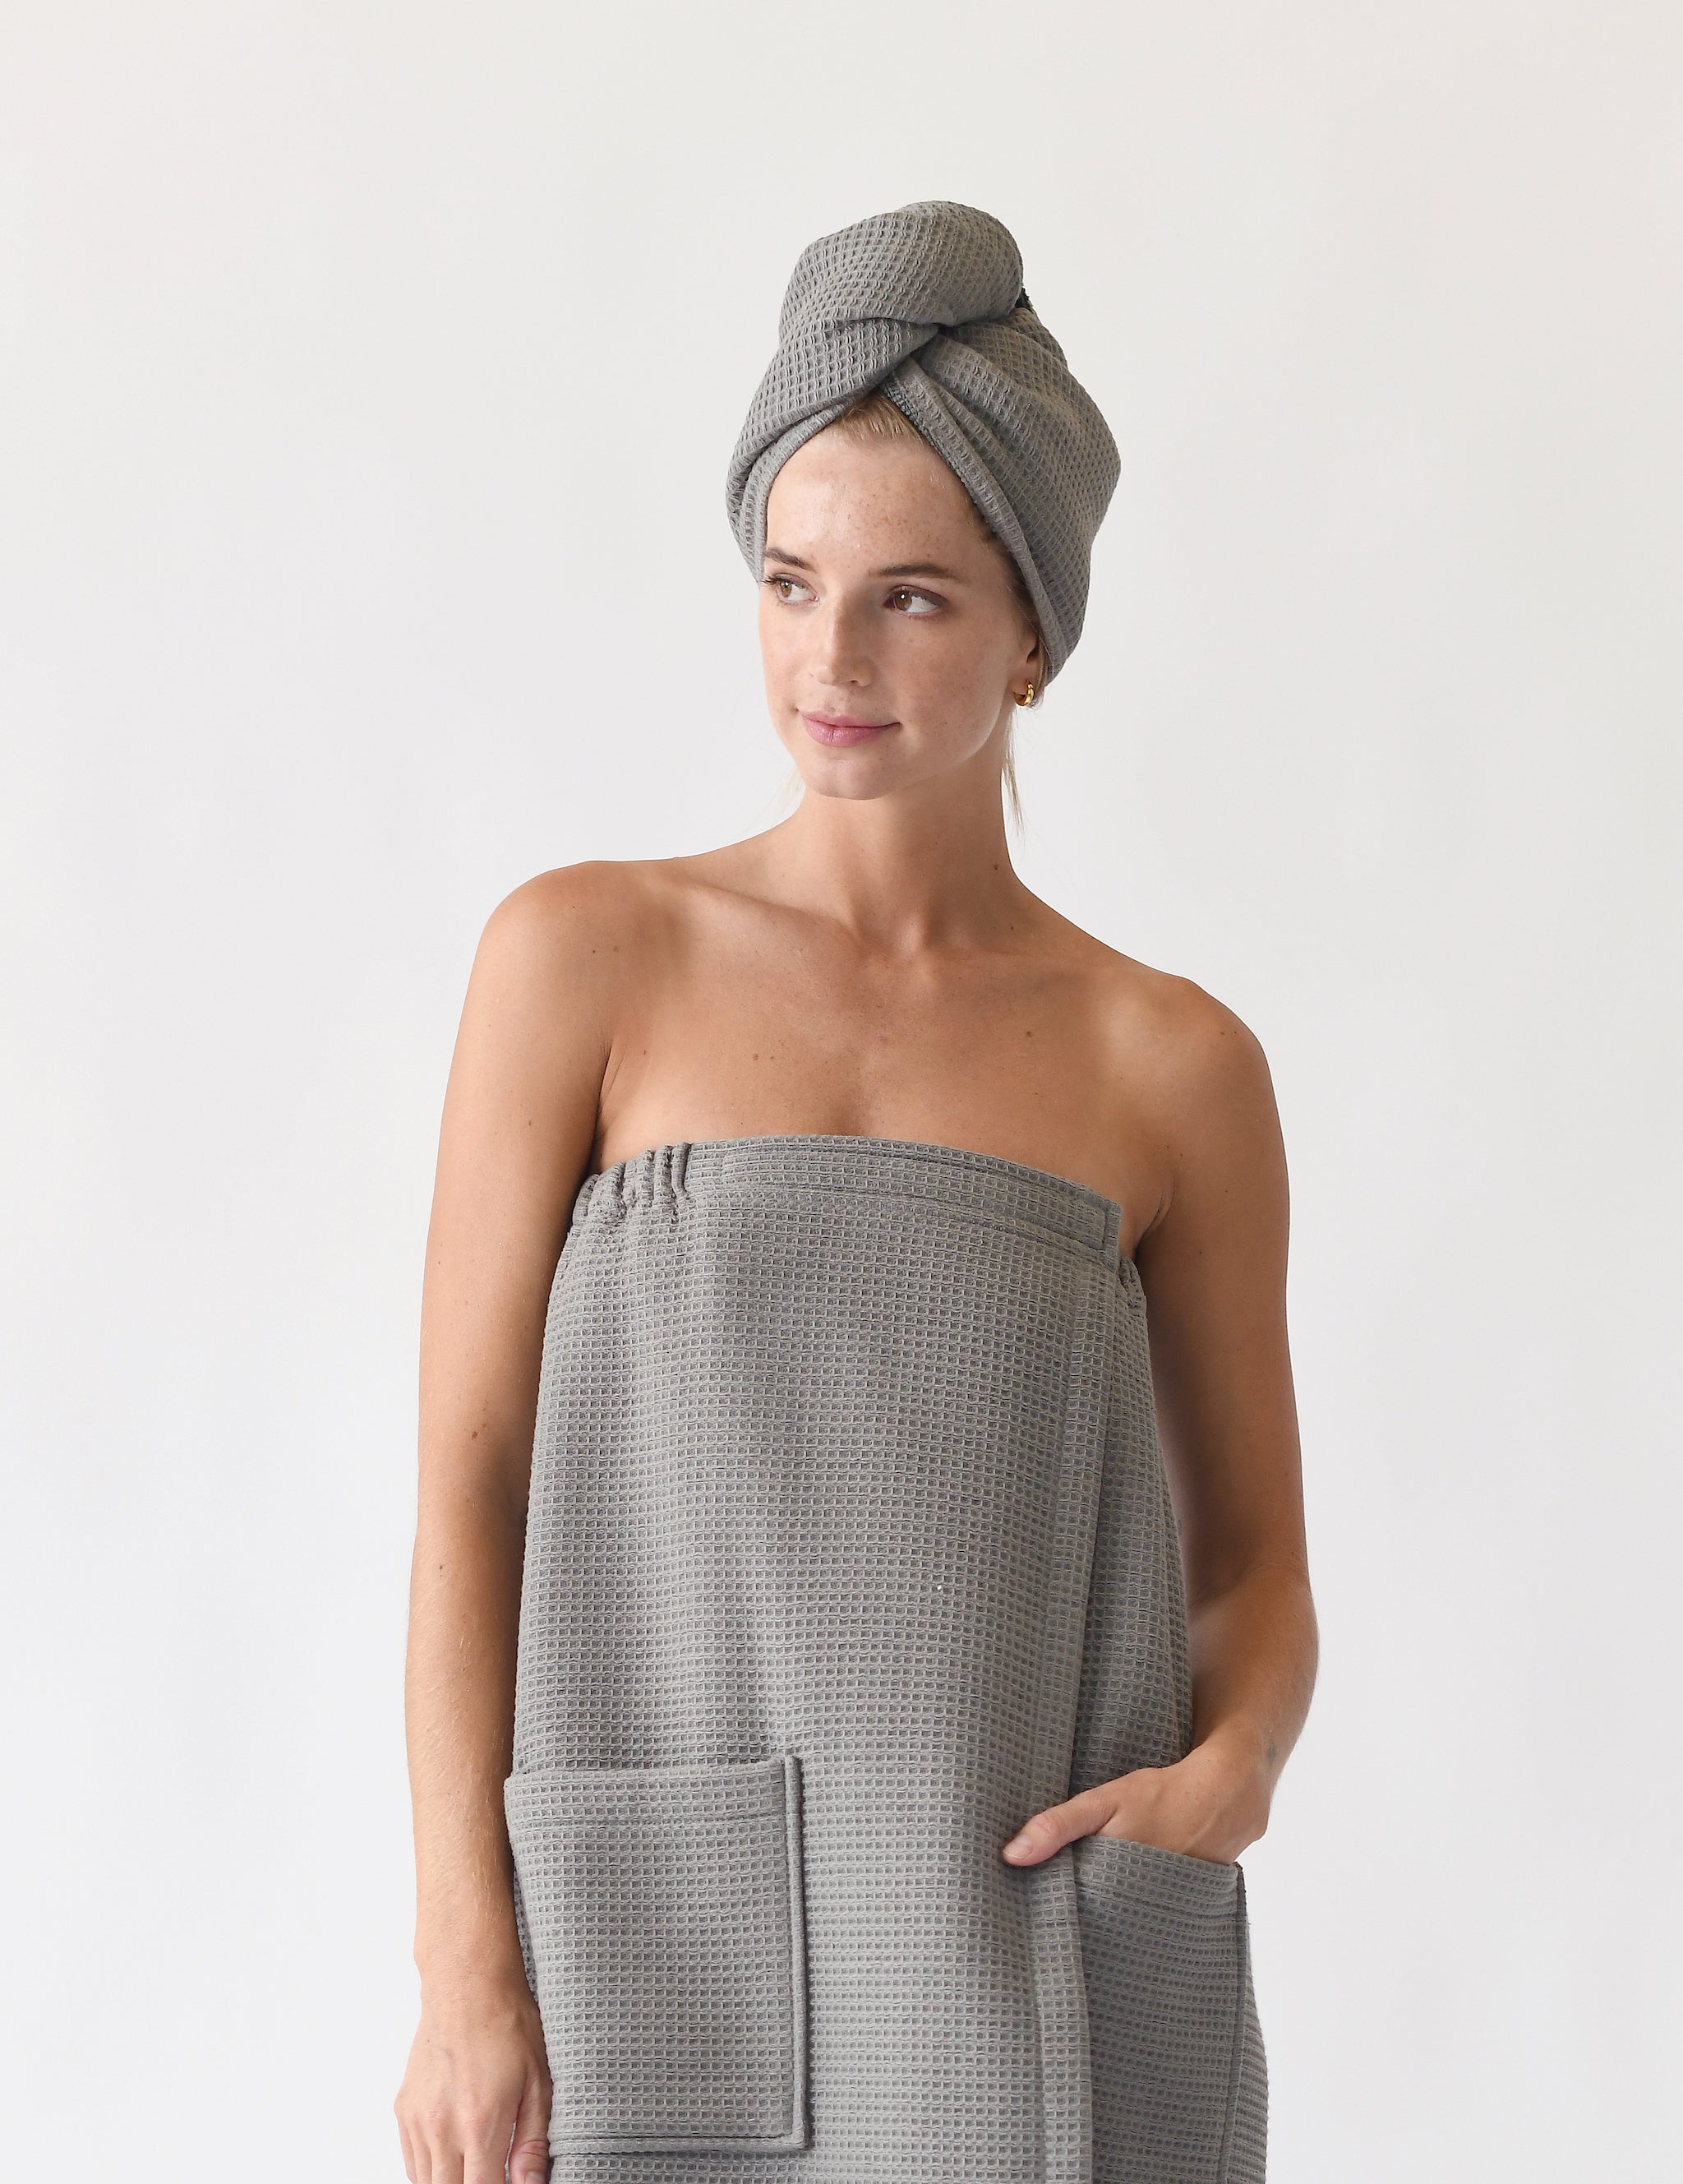 Charcoal Waffle Hair Towel. The hair towel is shown being worn by a woman who is also wearing a waffle bath wrap. Photo was taken with a white background.|Color:Charcoal